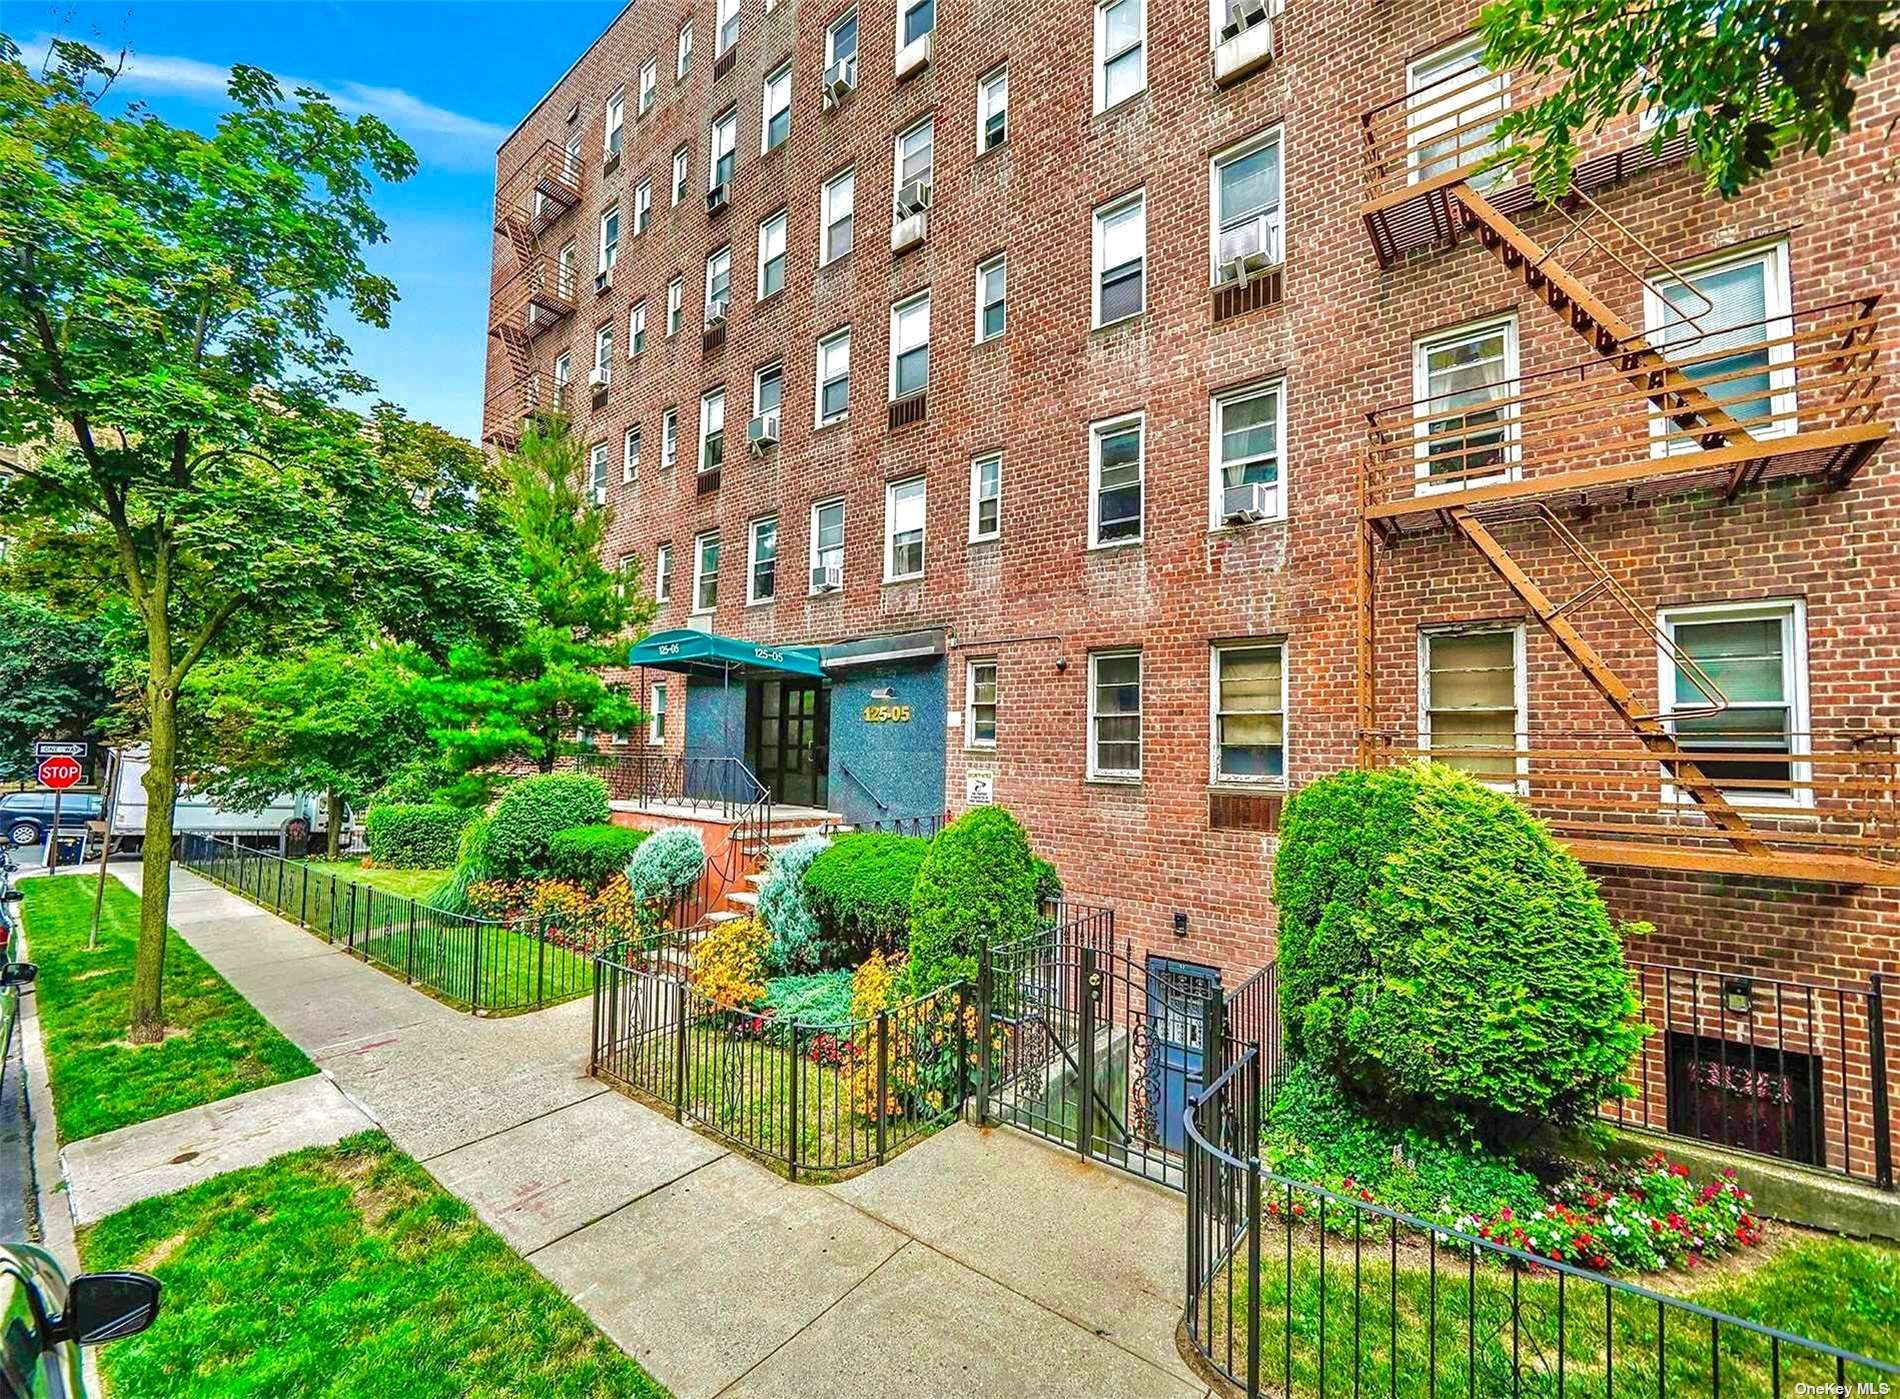 Apartment in Kew Gardens - 84th  Queens, NY 11415